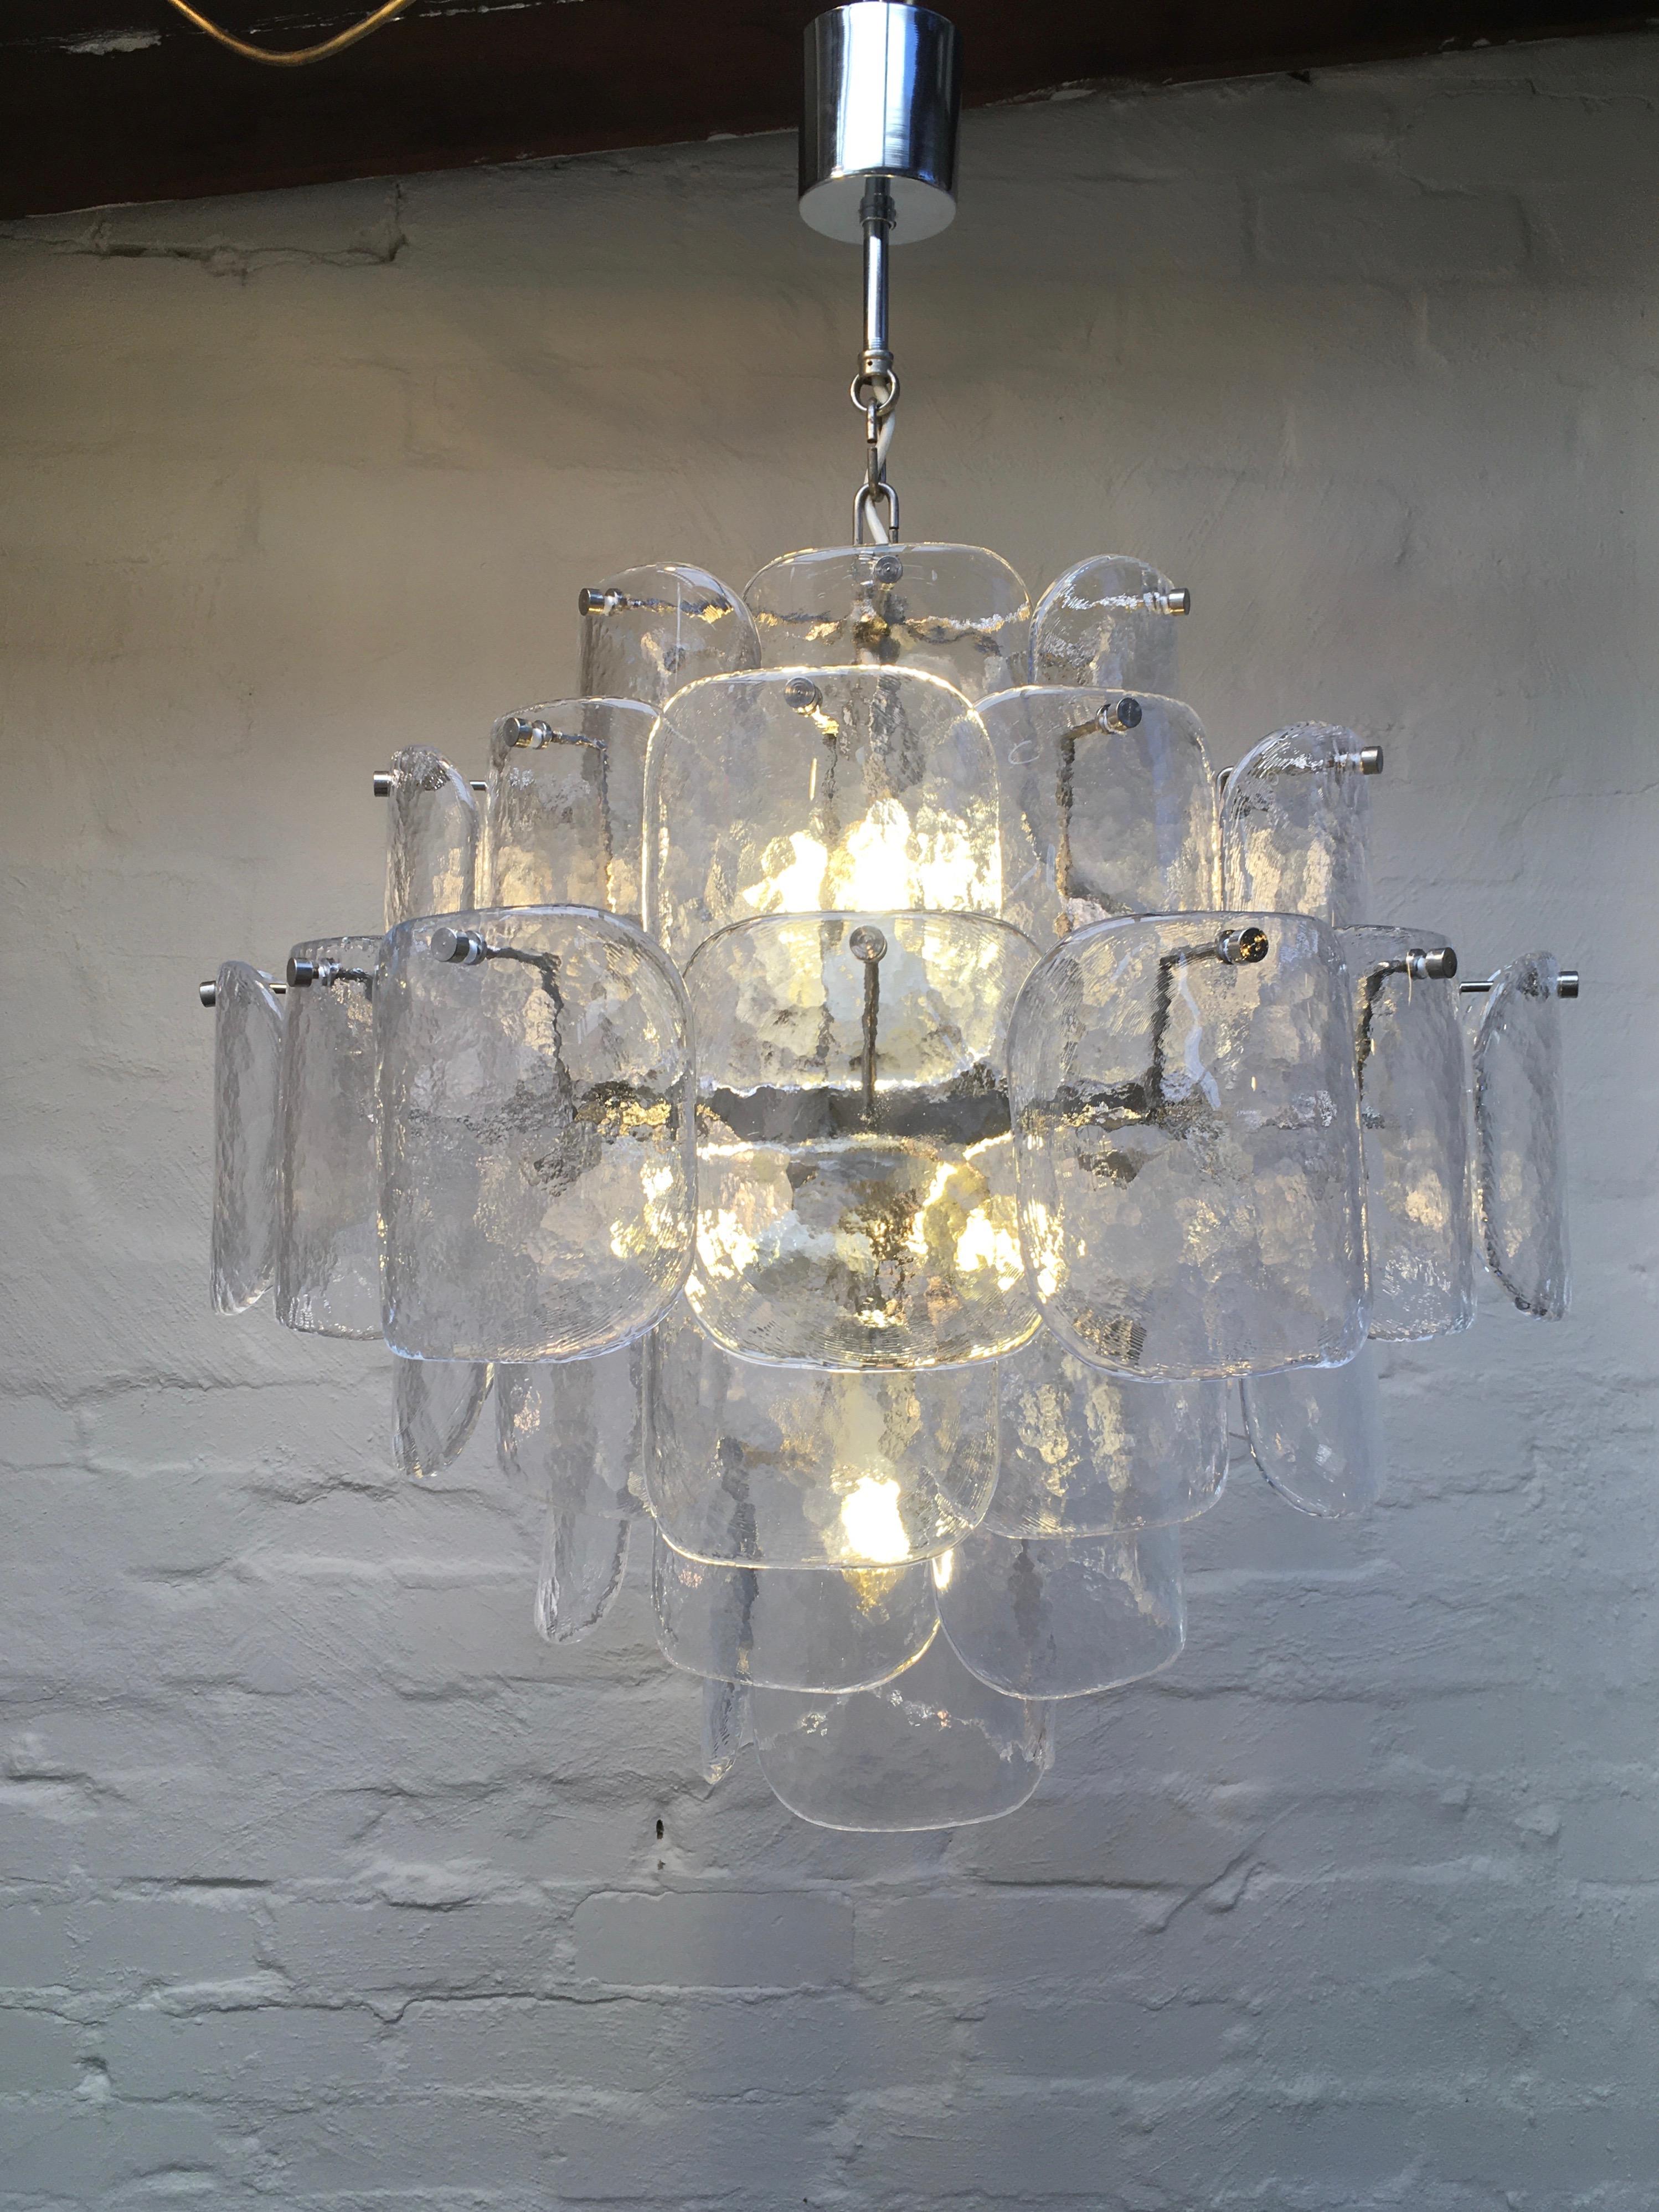 Organic Modern Large Six-Tier Carlo Nason Mazzega 1960s Chandelier in Clear Glass and Chrome